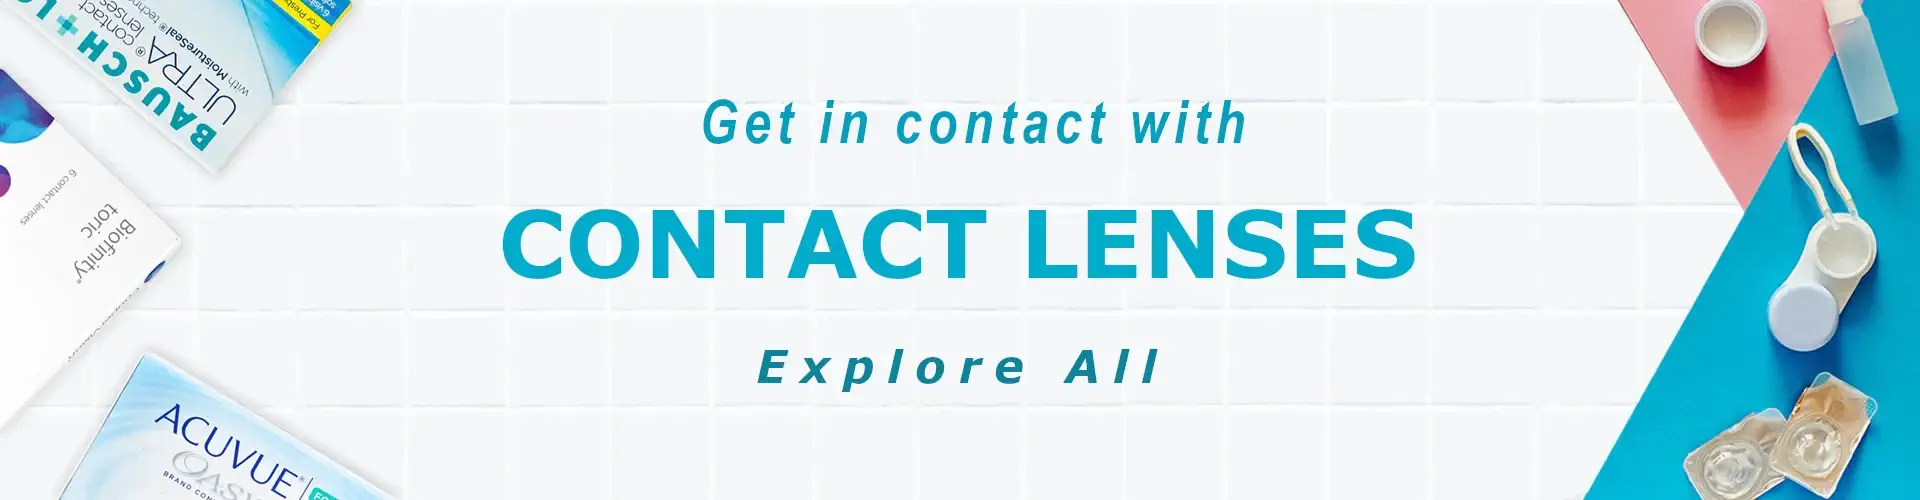 Contact Lenses Banner